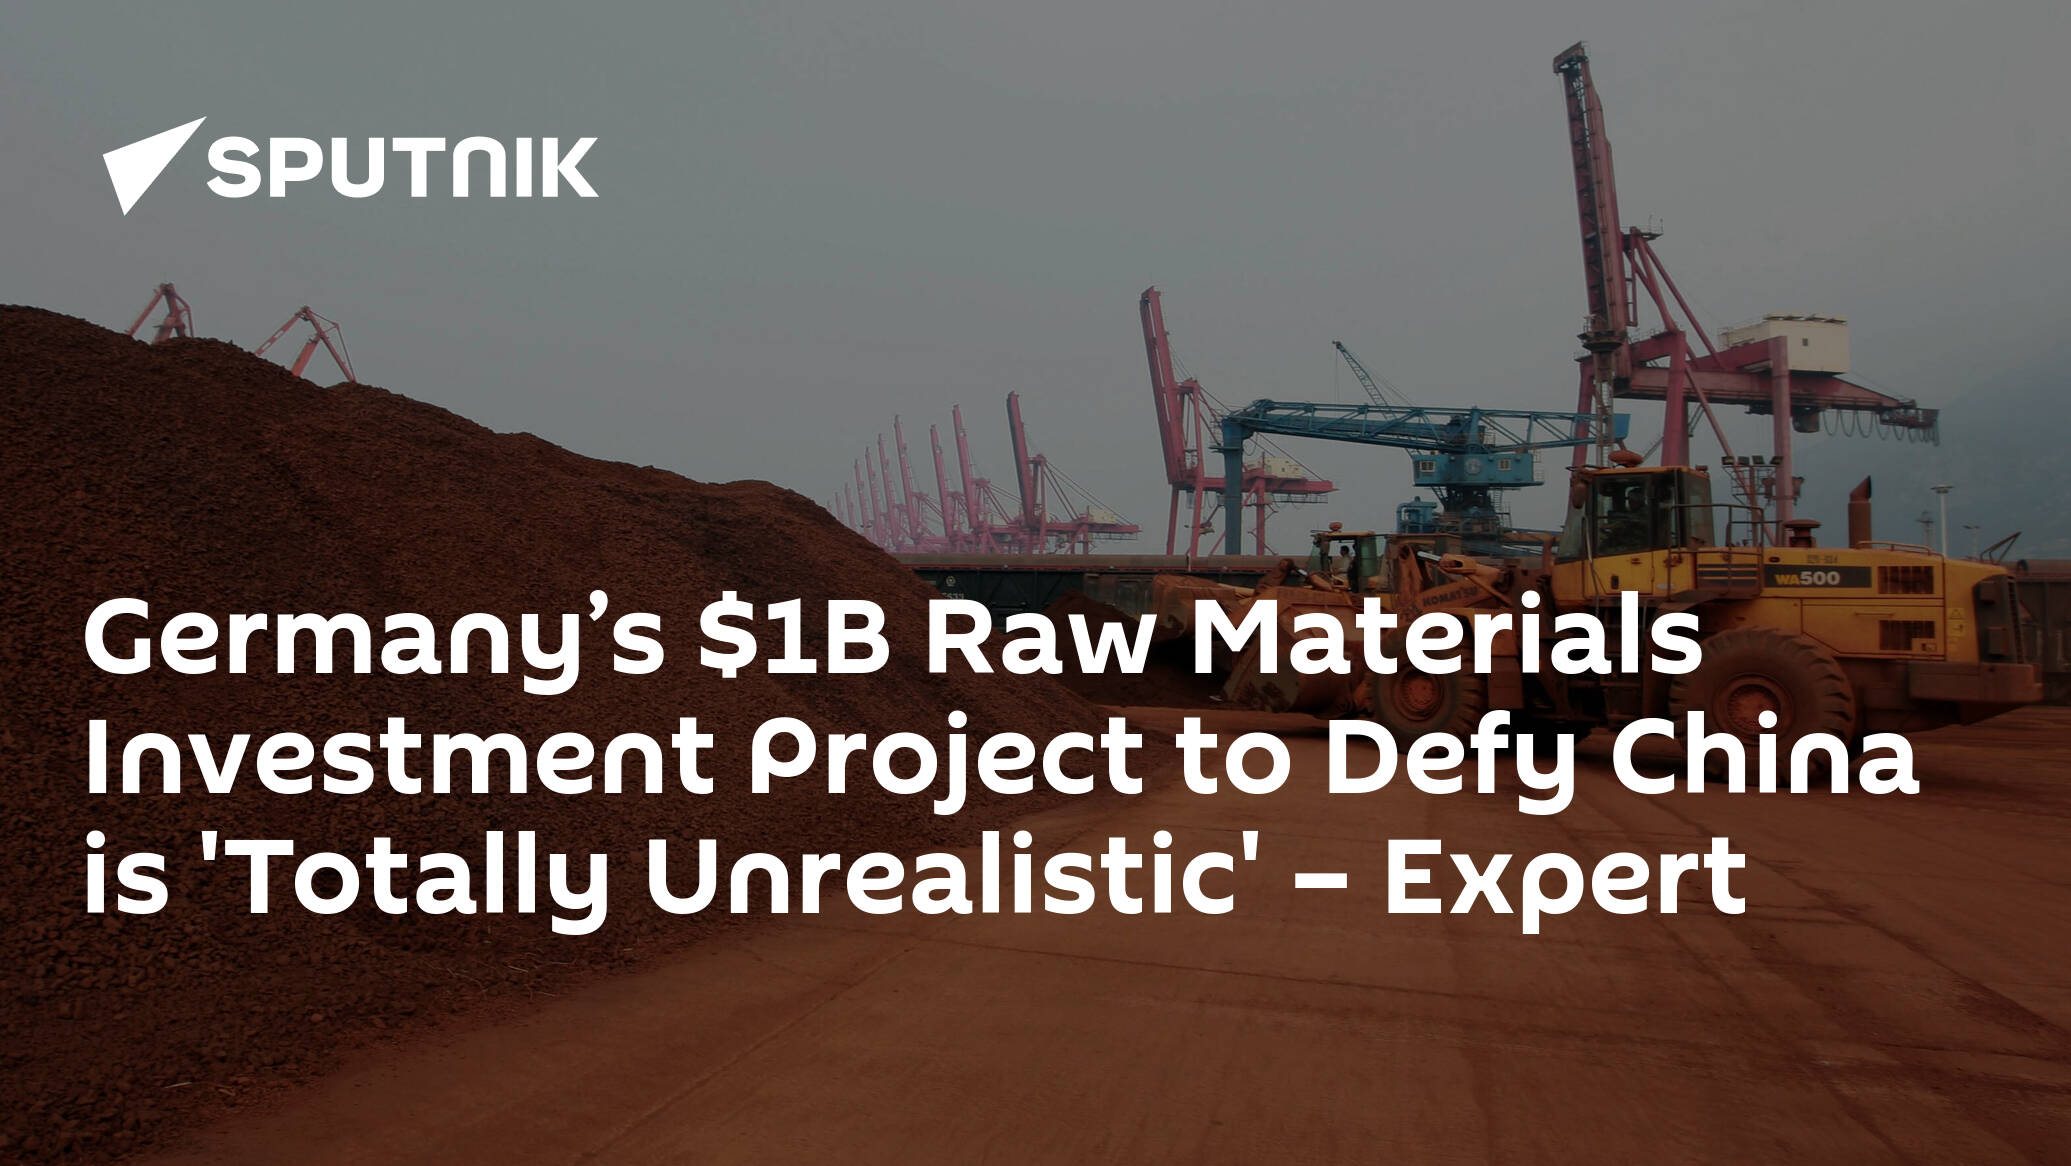 Germany’s B Raw Materials Investment Project to Defy China is 'Totally Unrealistic' – Expert